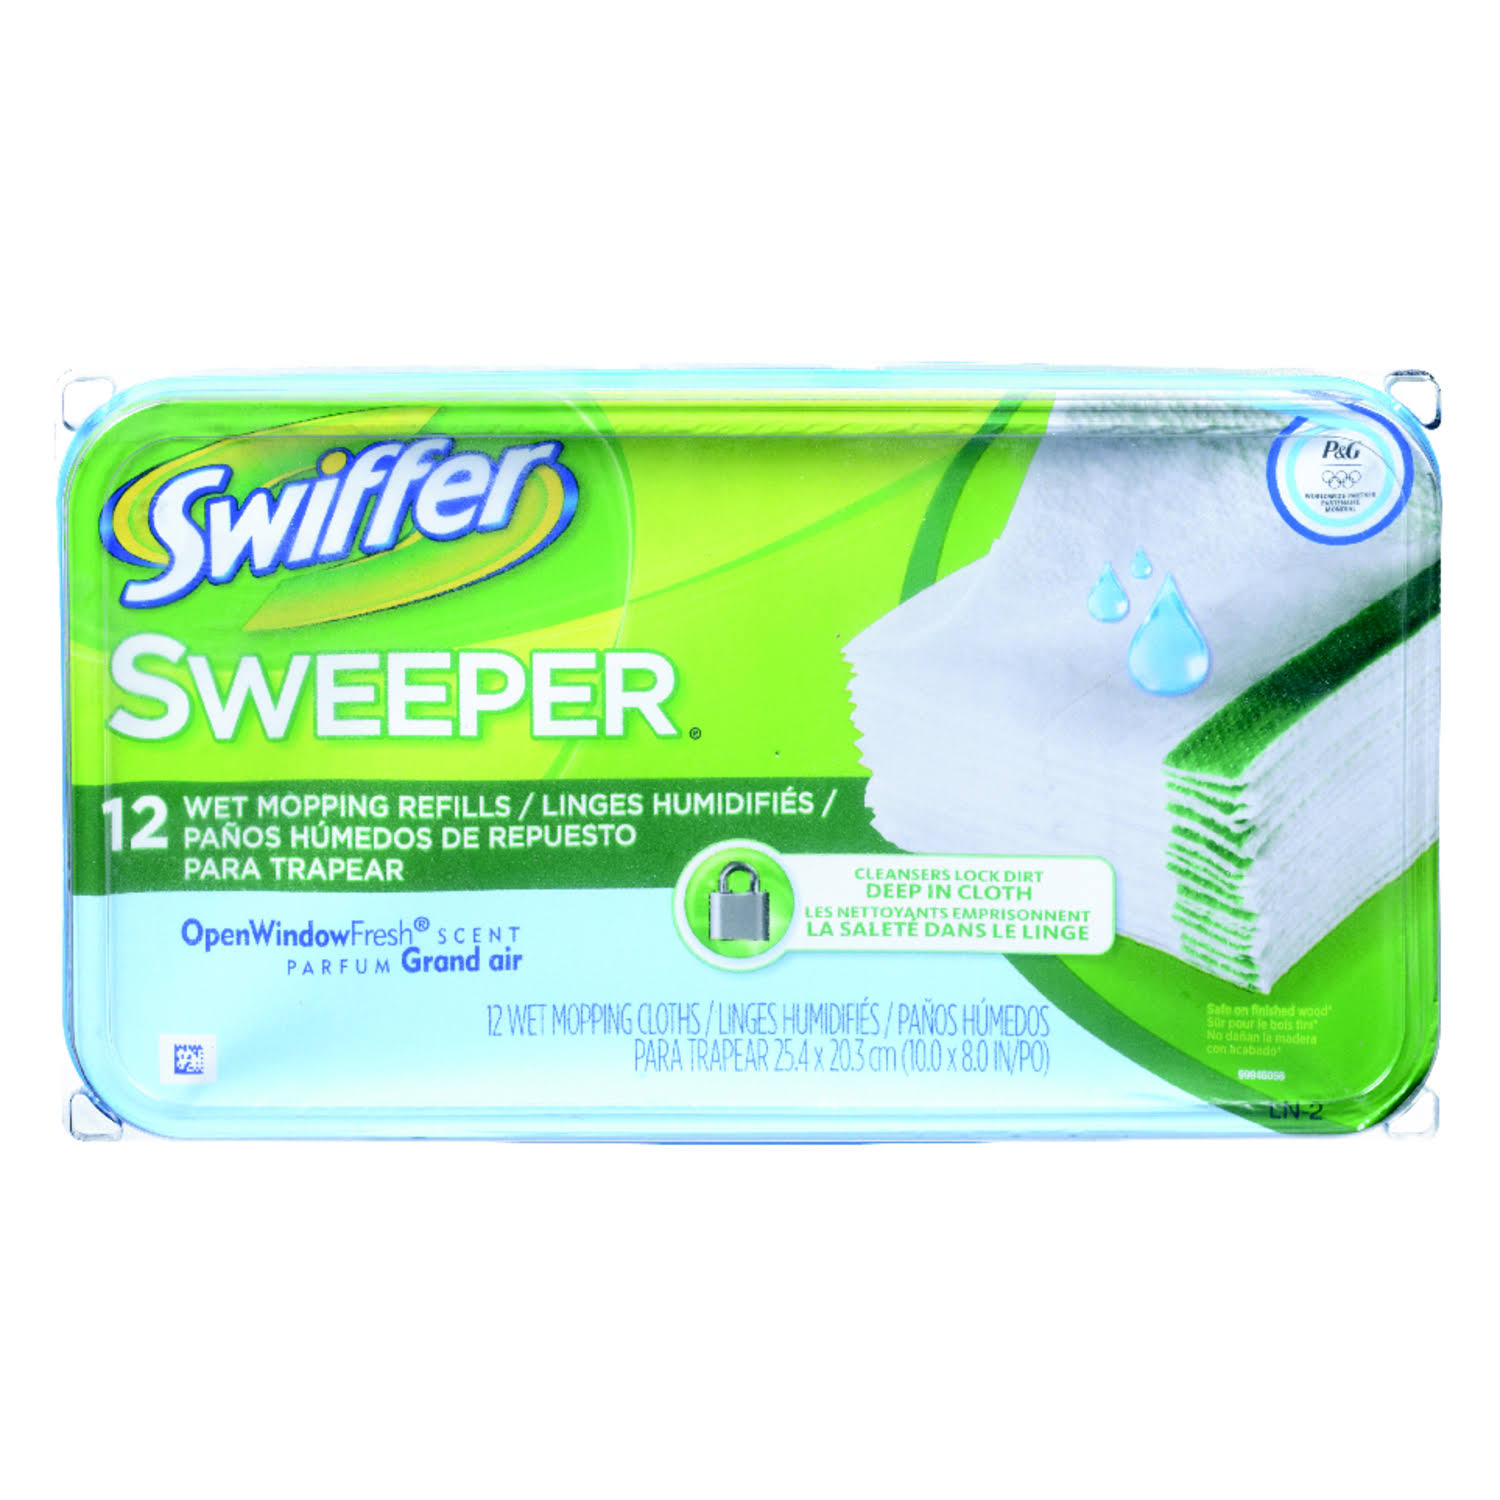 Swiffer Sweeper Wet Mopping Refill Cloths - 12 Pack